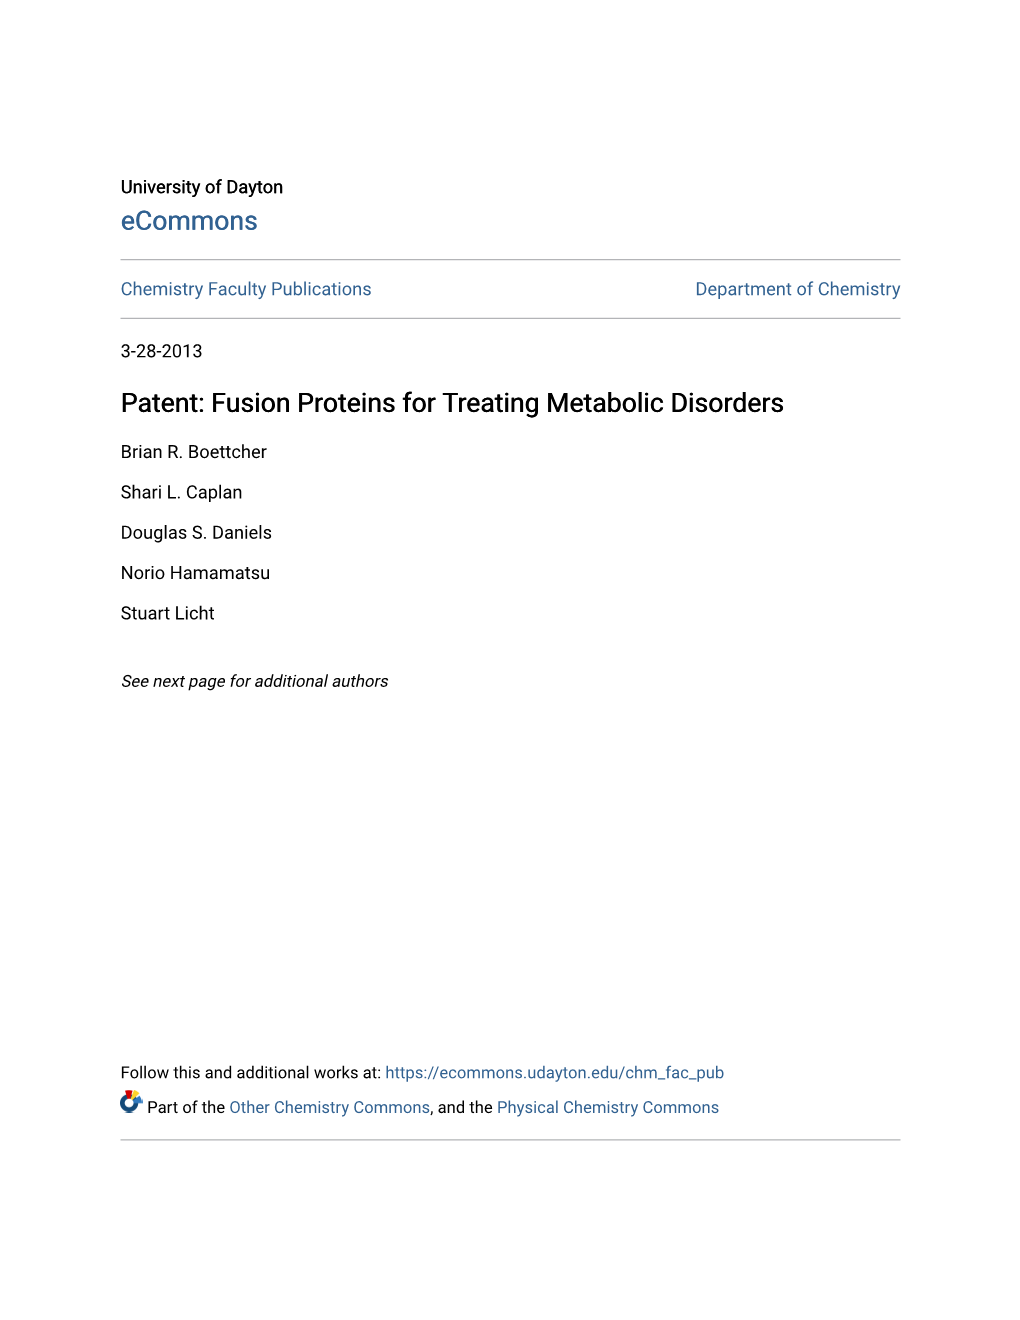 Patent: Fusion Proteins for Treating Metabolic Disorders